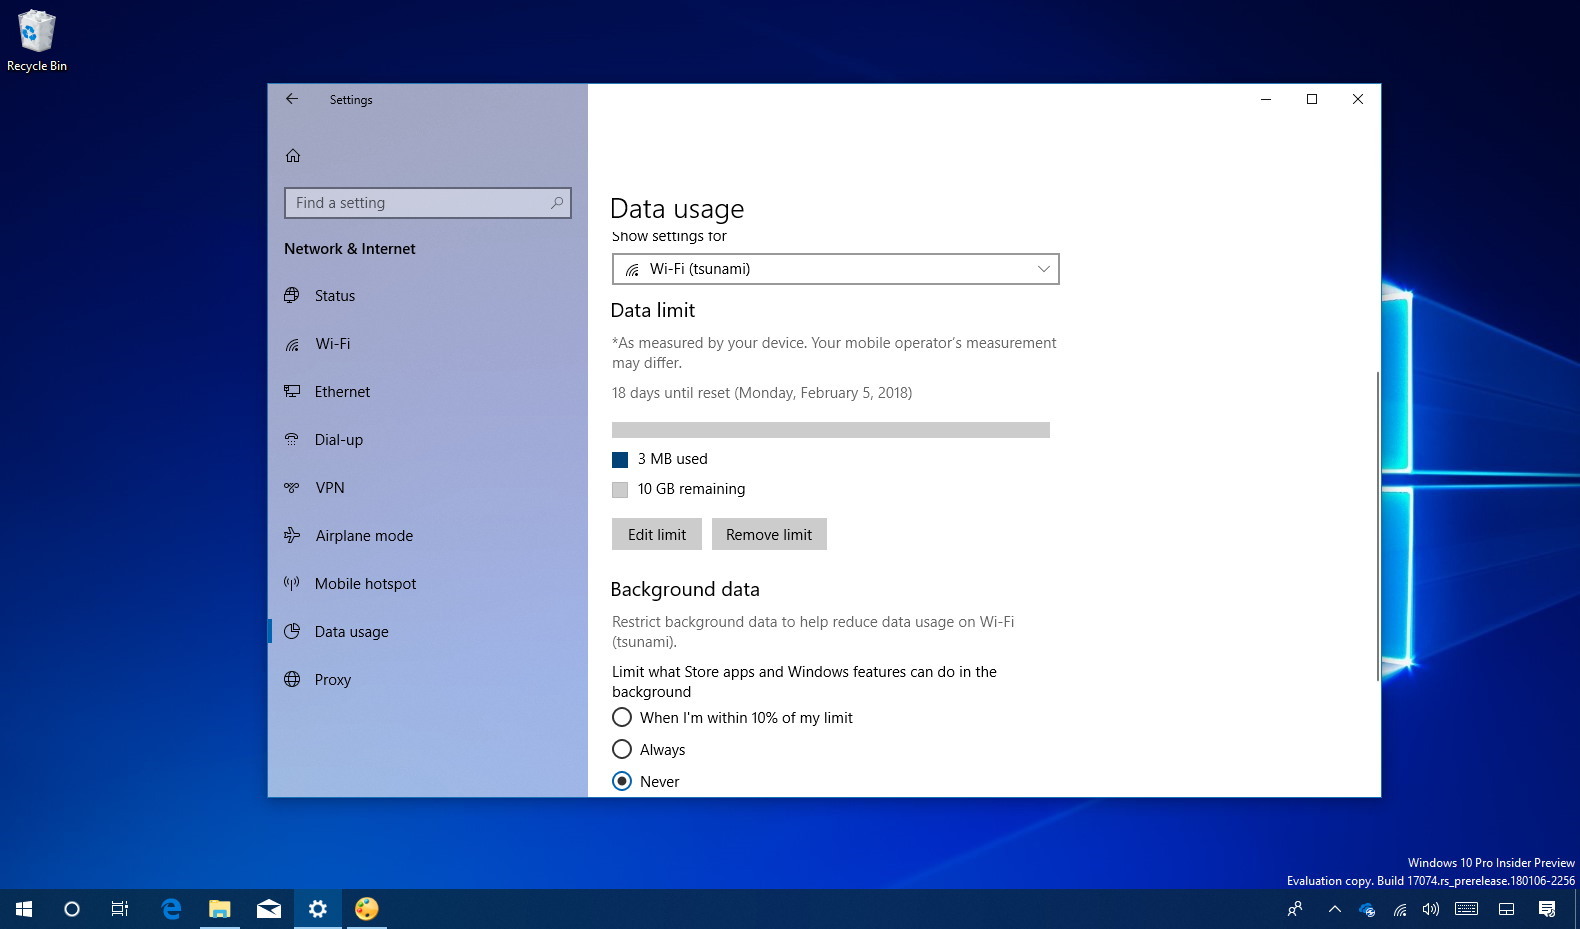 How to set data usage limit on Wi-Fi networks on Windows 10 - Pureinfotech